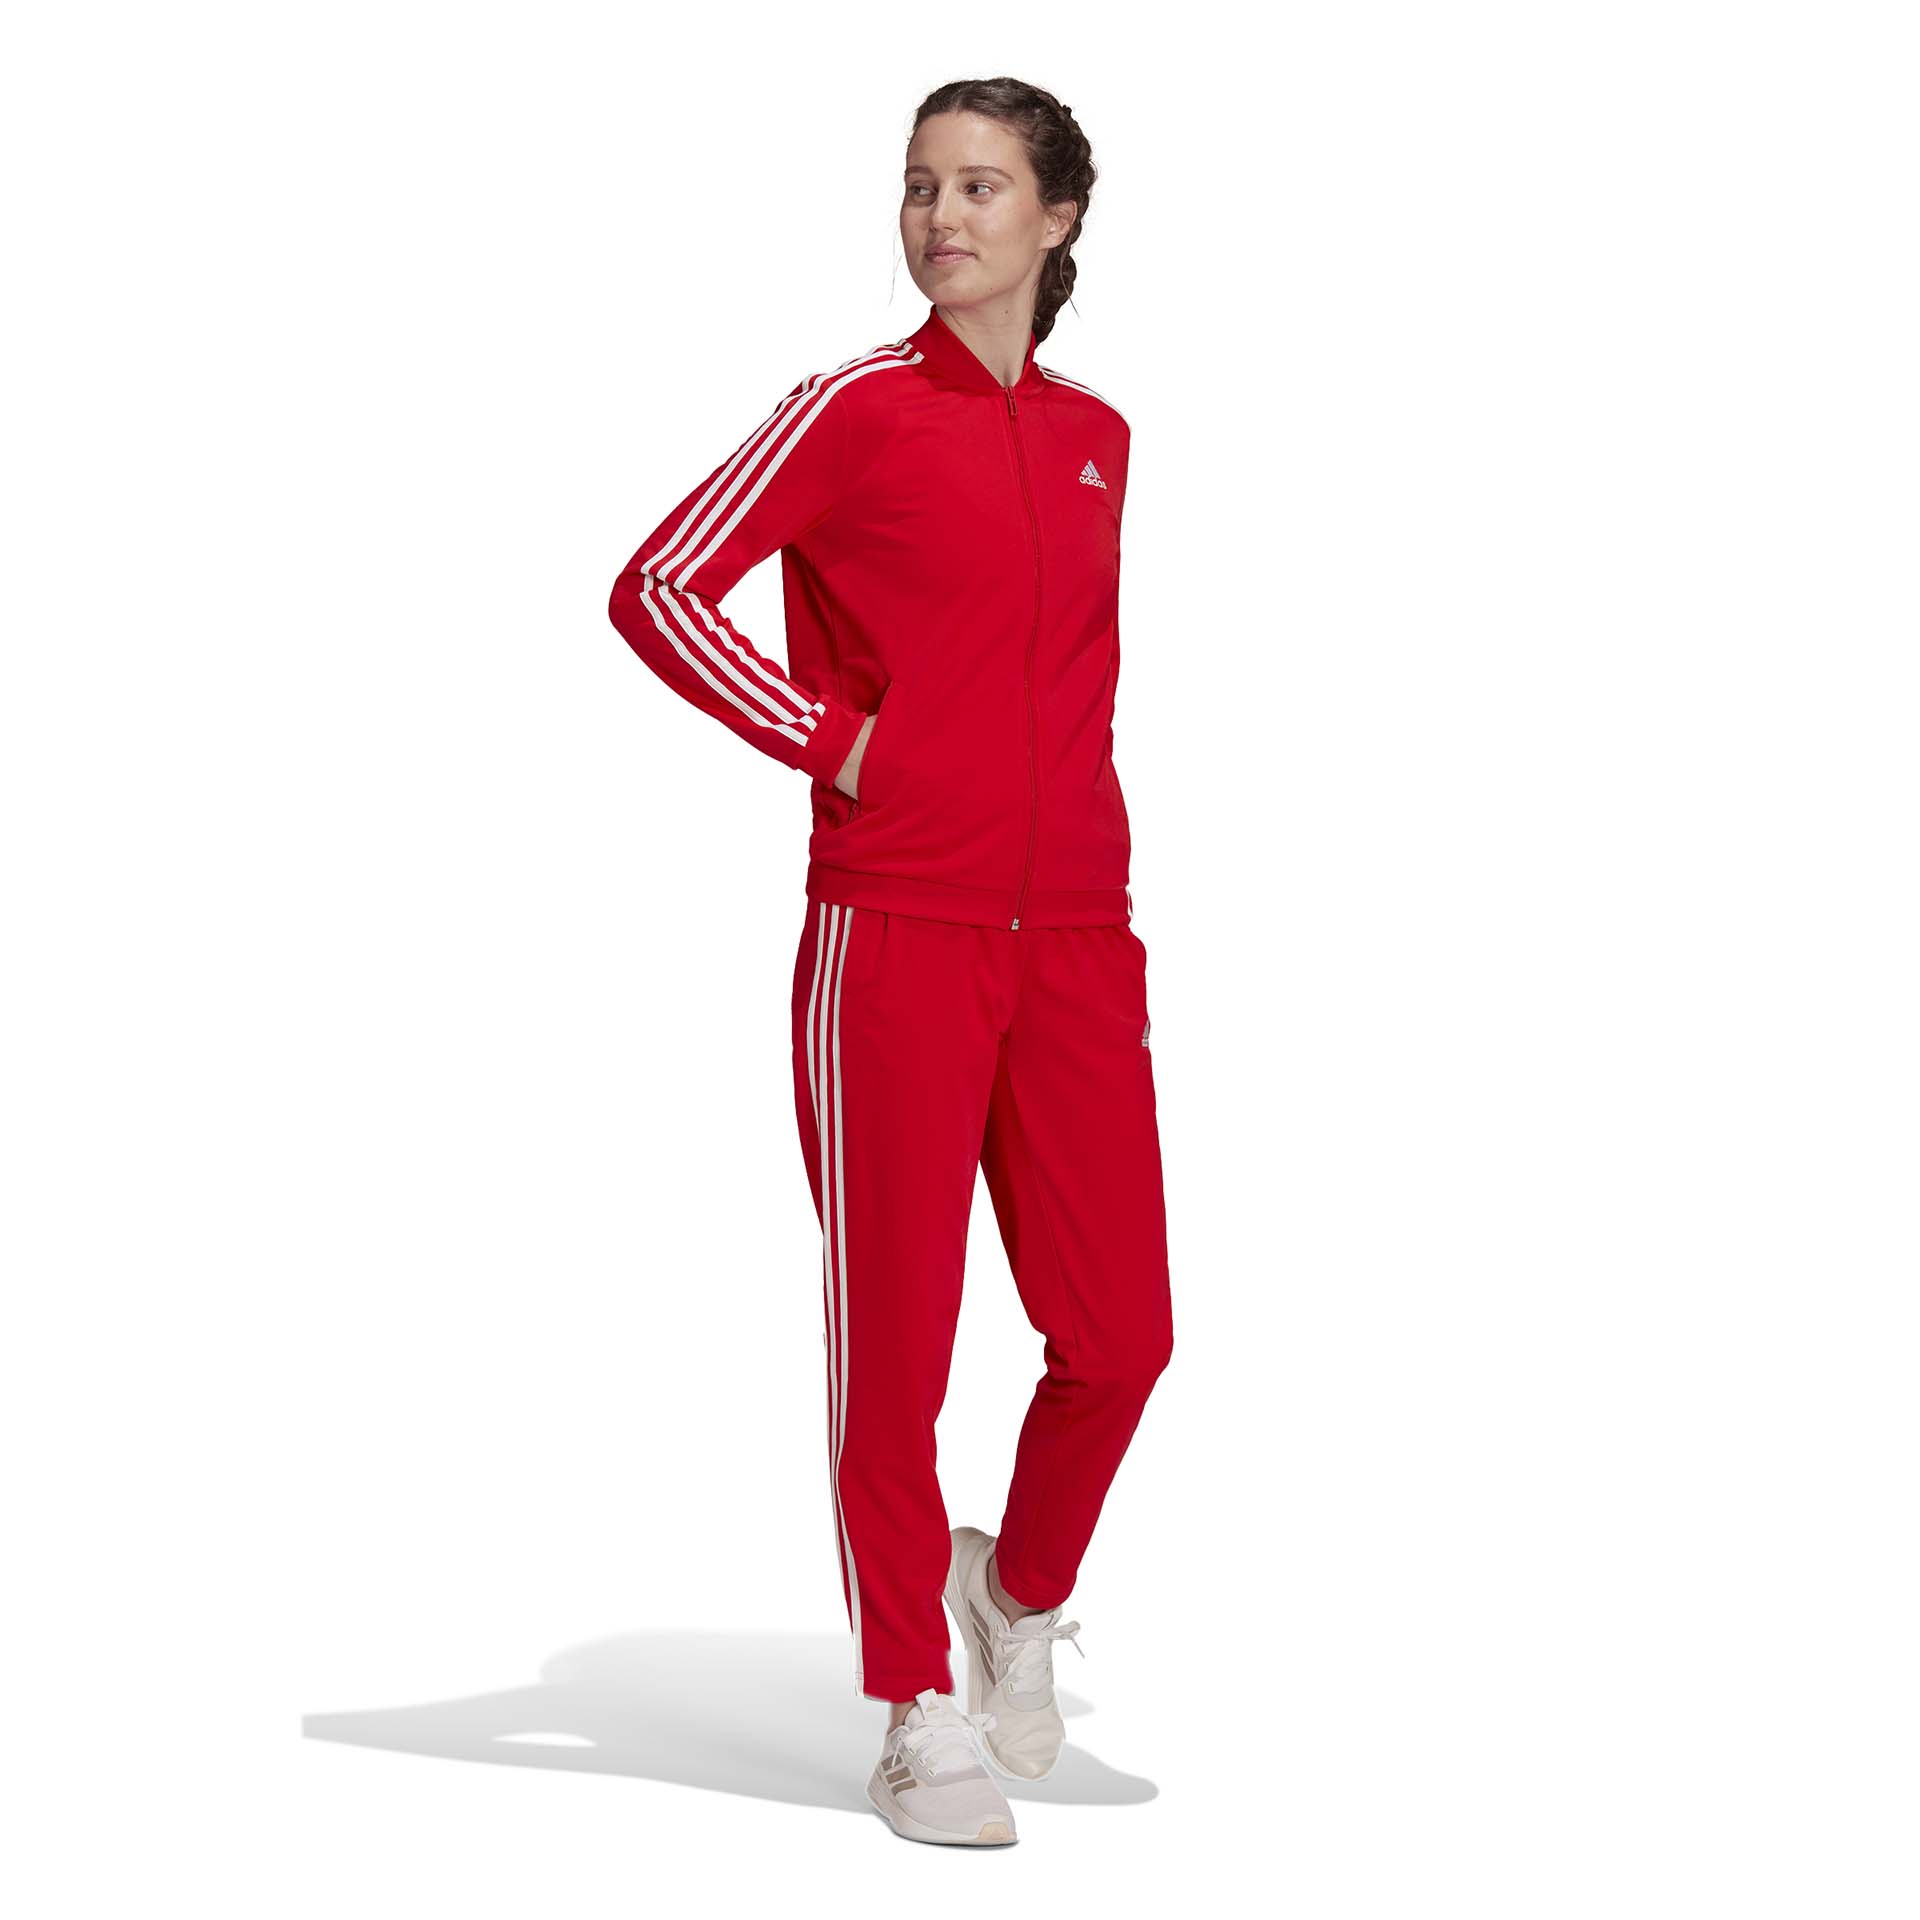 adidas women's 3 Stripes Track suit Vivid Red / White